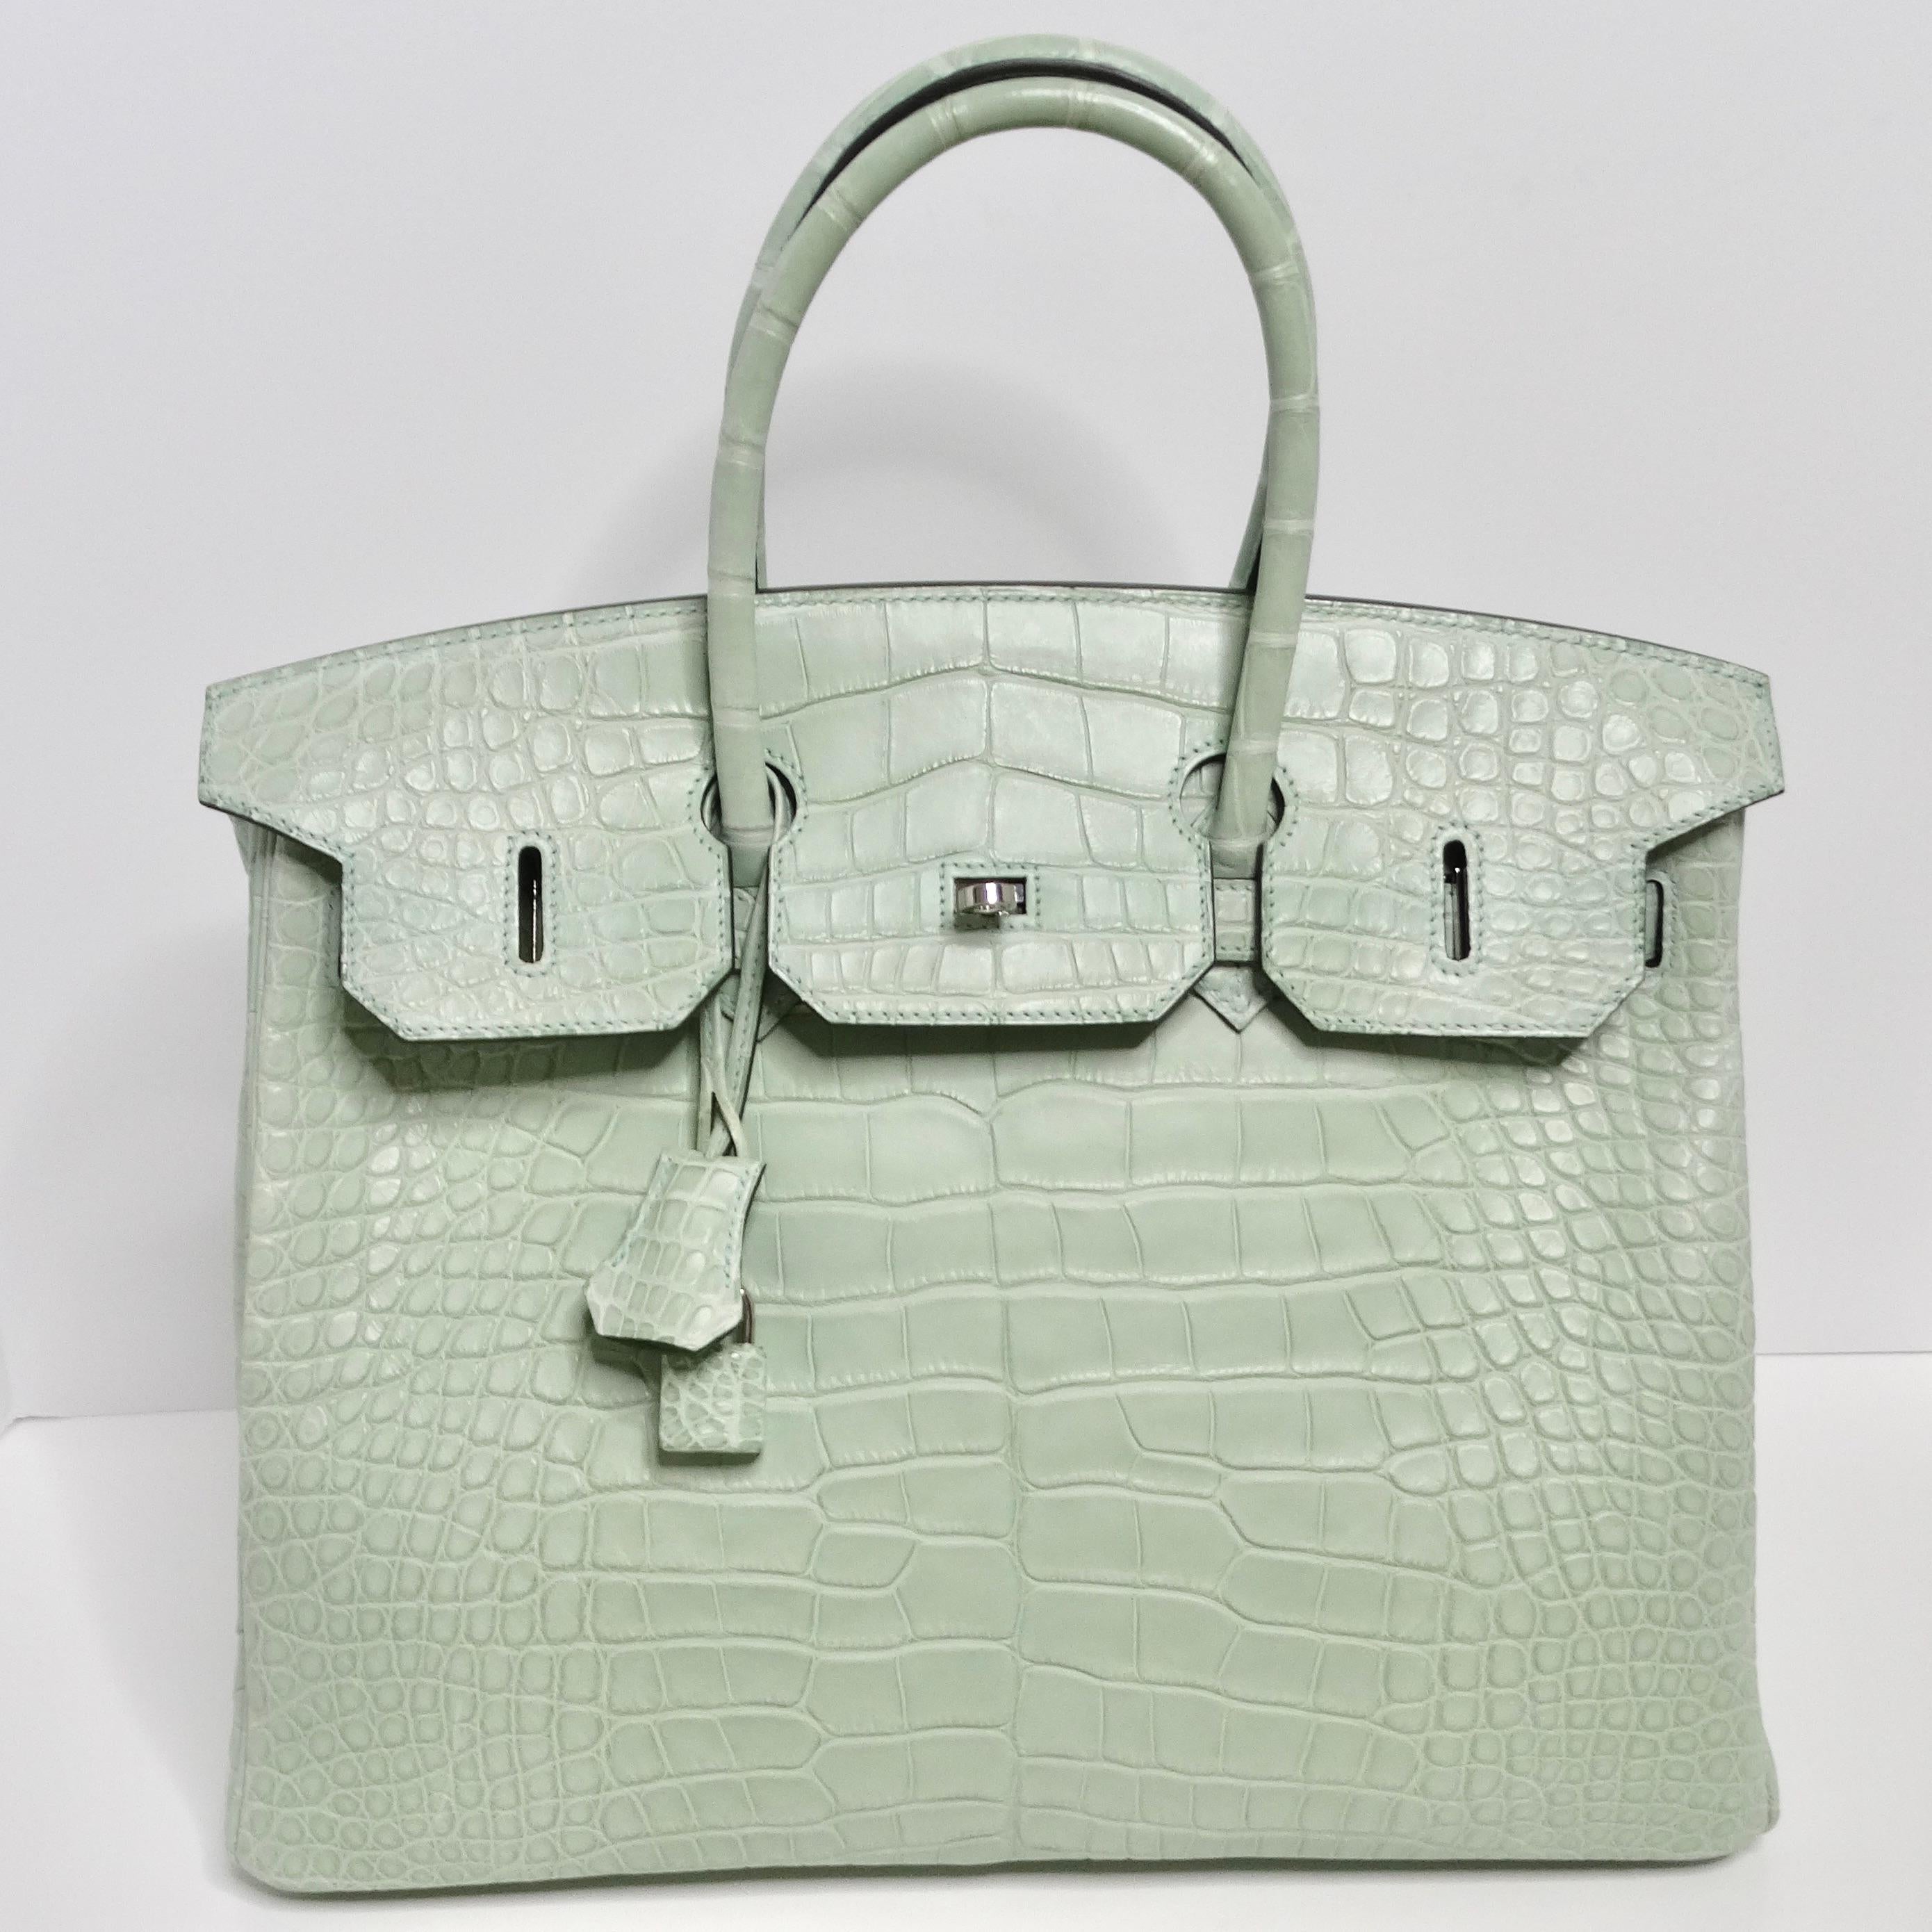 Introducing the epitome of luxury and sophistication, the Hermes Birkin 35 Vert D'Eau Matte Alligator Palladium Hardware handbag. Crafted in 2021, this iconic handbag is a testament to Hermes' impeccable craftsmanship and timeless design.

This